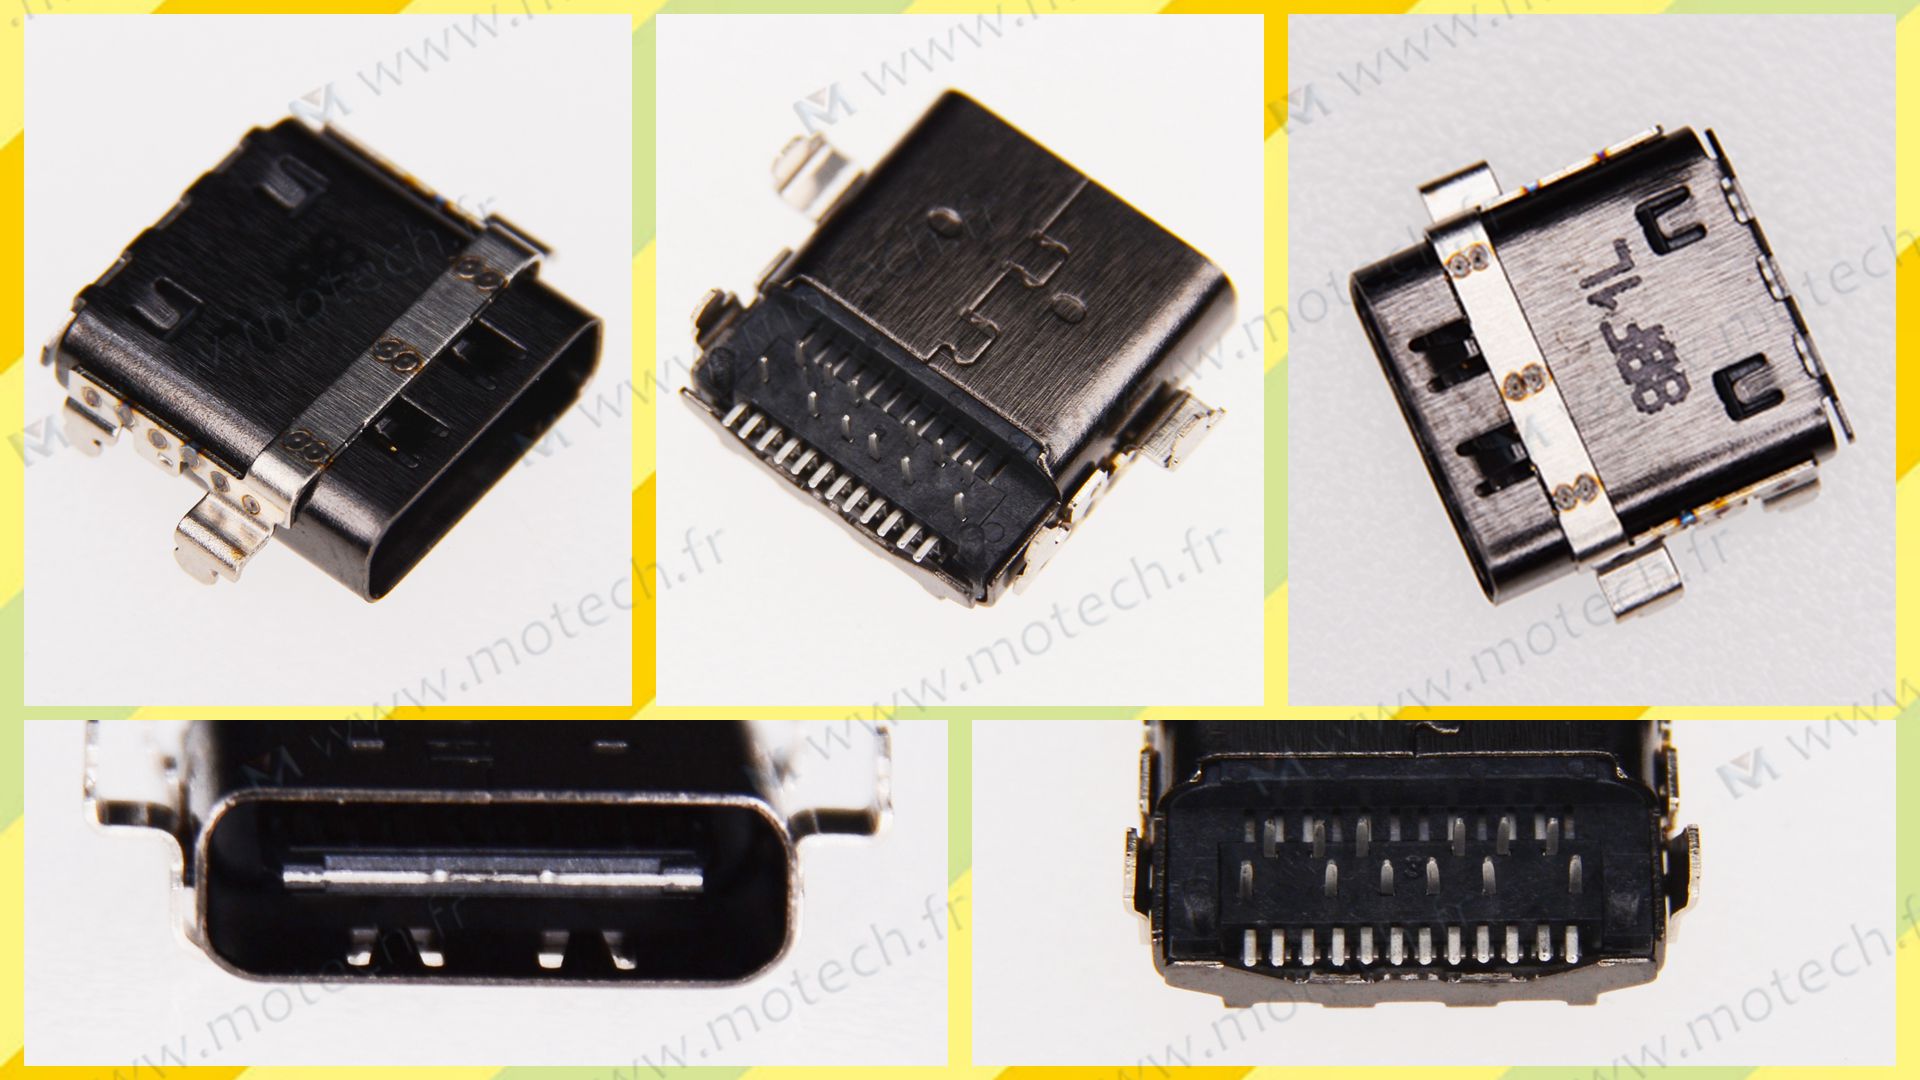  Dell 7370 USB Type C, Dell 7370 Port USB à souder, Dell 7370 charging card, Dell 7370 USB port for welding, Dell 7370 charging port, Dell 7370 charging connector, Dell 7370 DC Power Jack, Socket Plug Port Dell 7370, Power jack Dell 7370, 